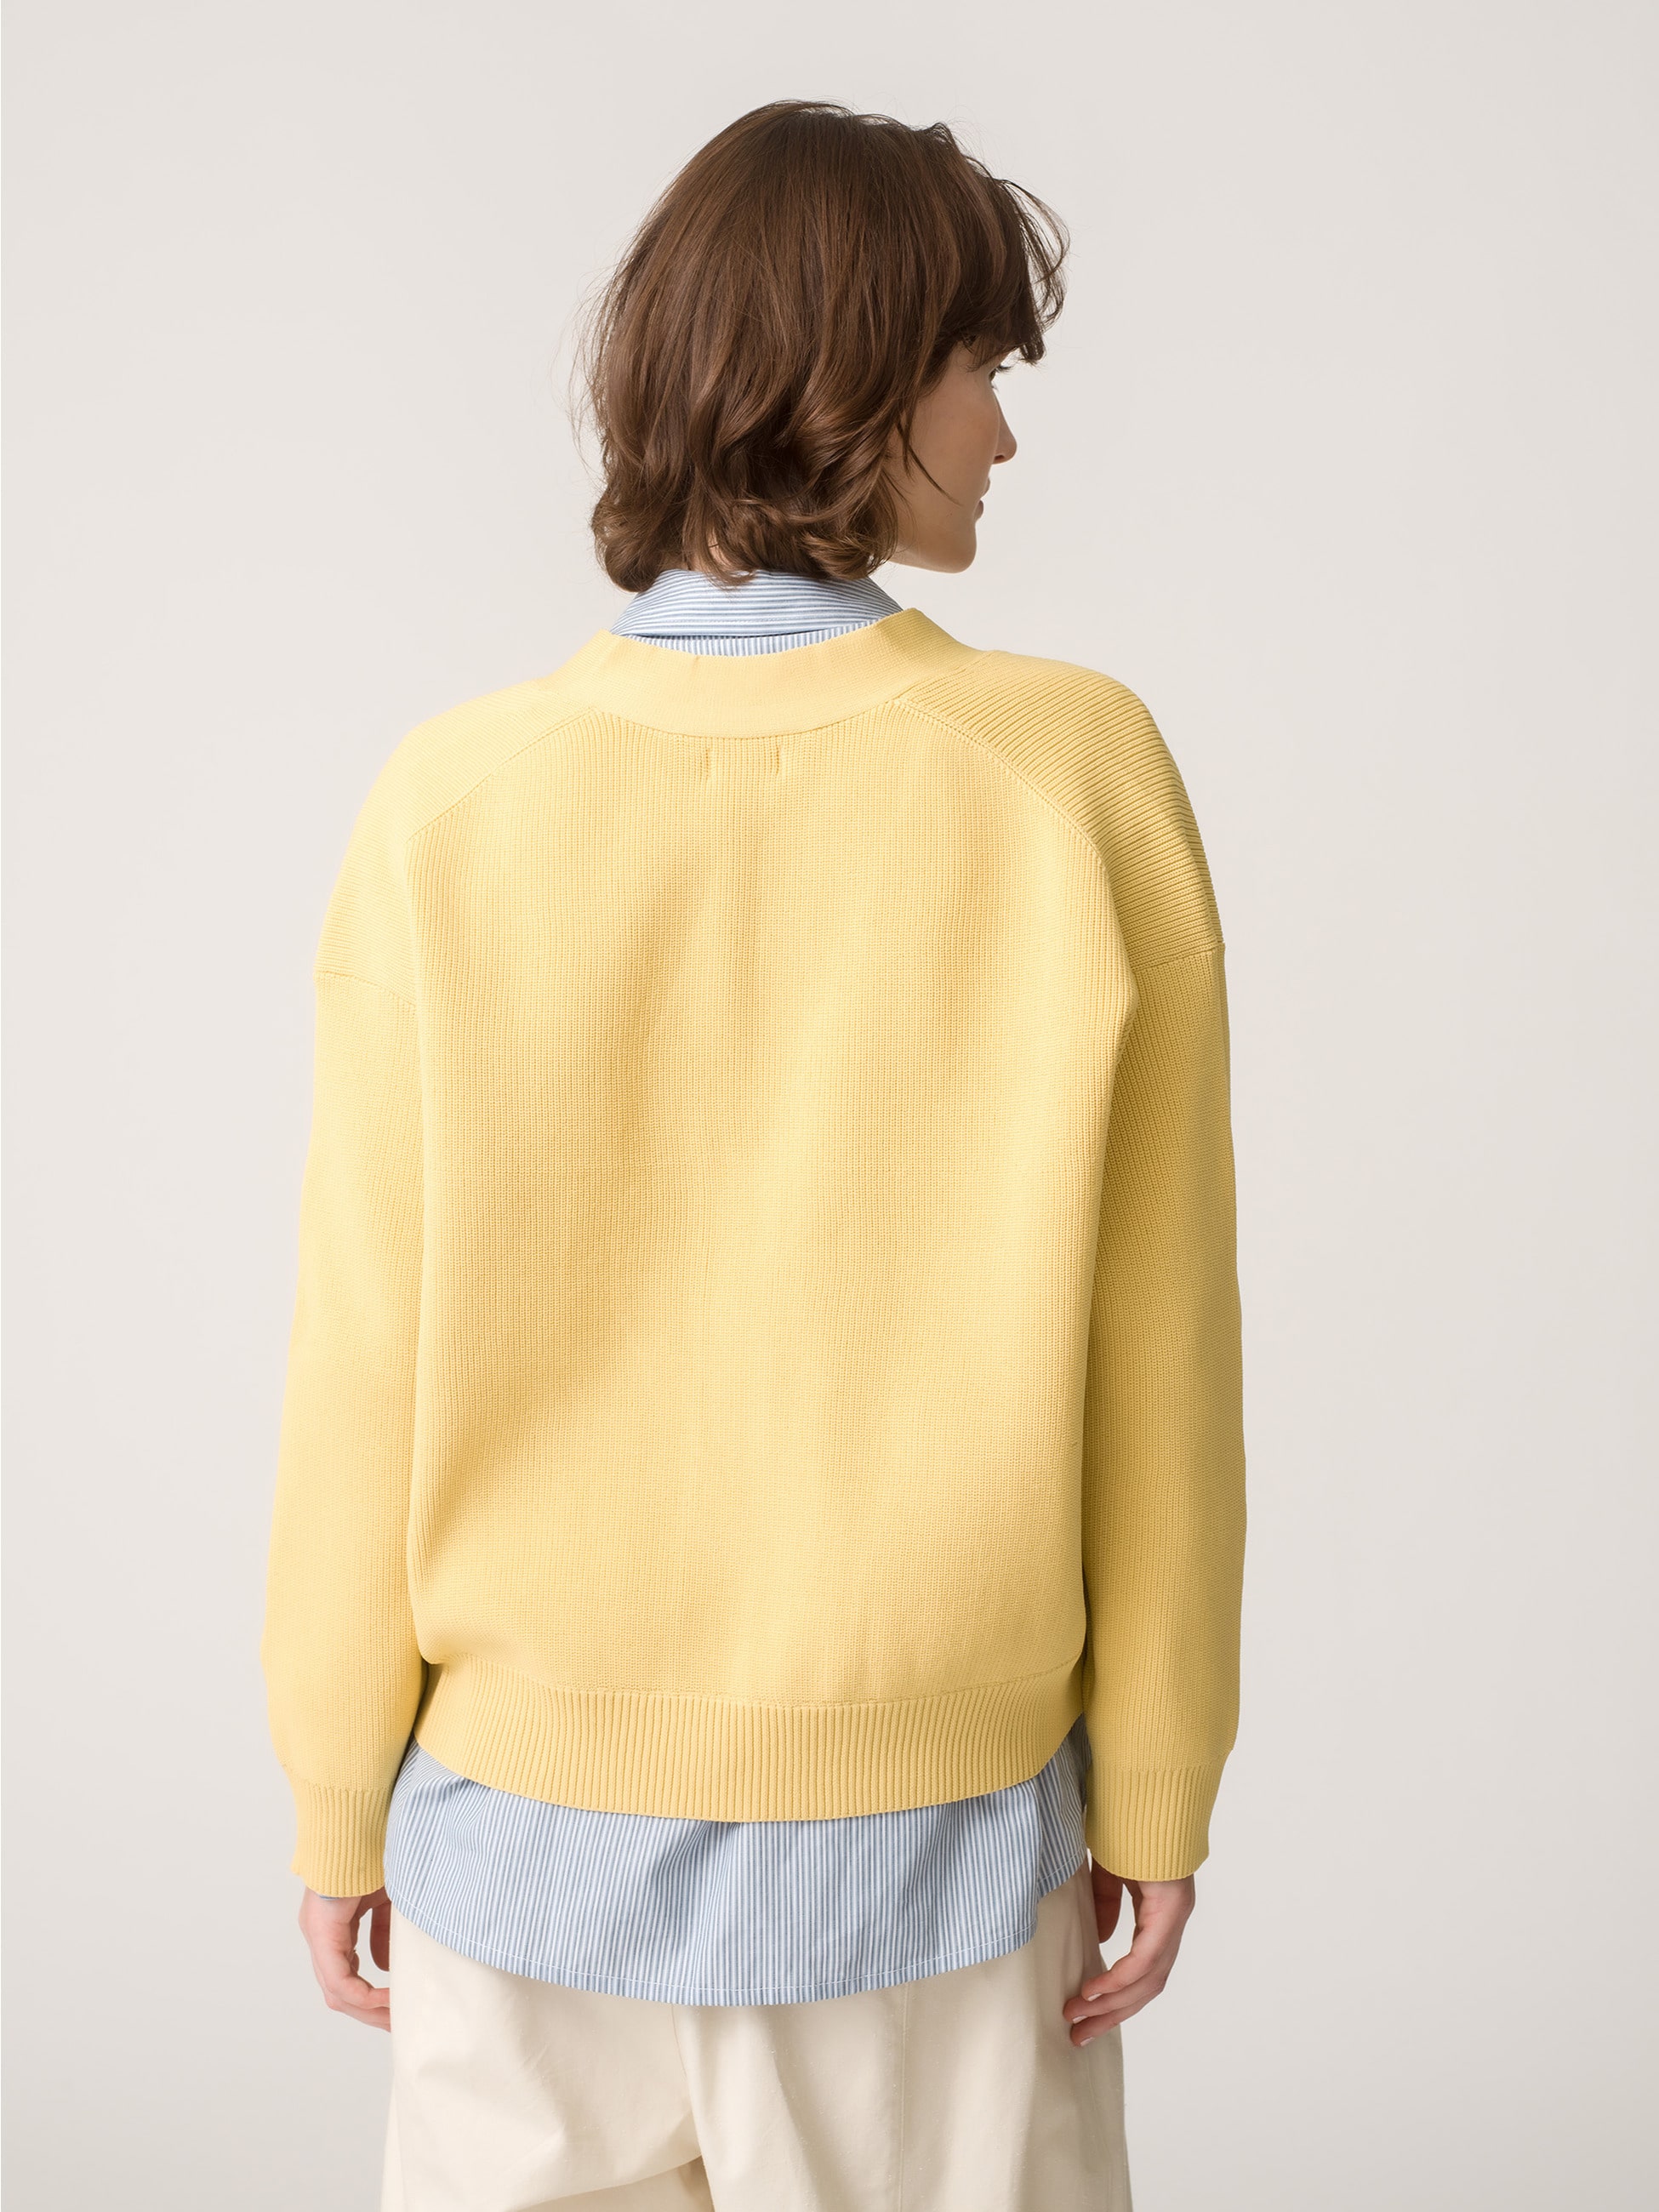 Recycle Polyester Cardigan 詳細画像 yellow 3